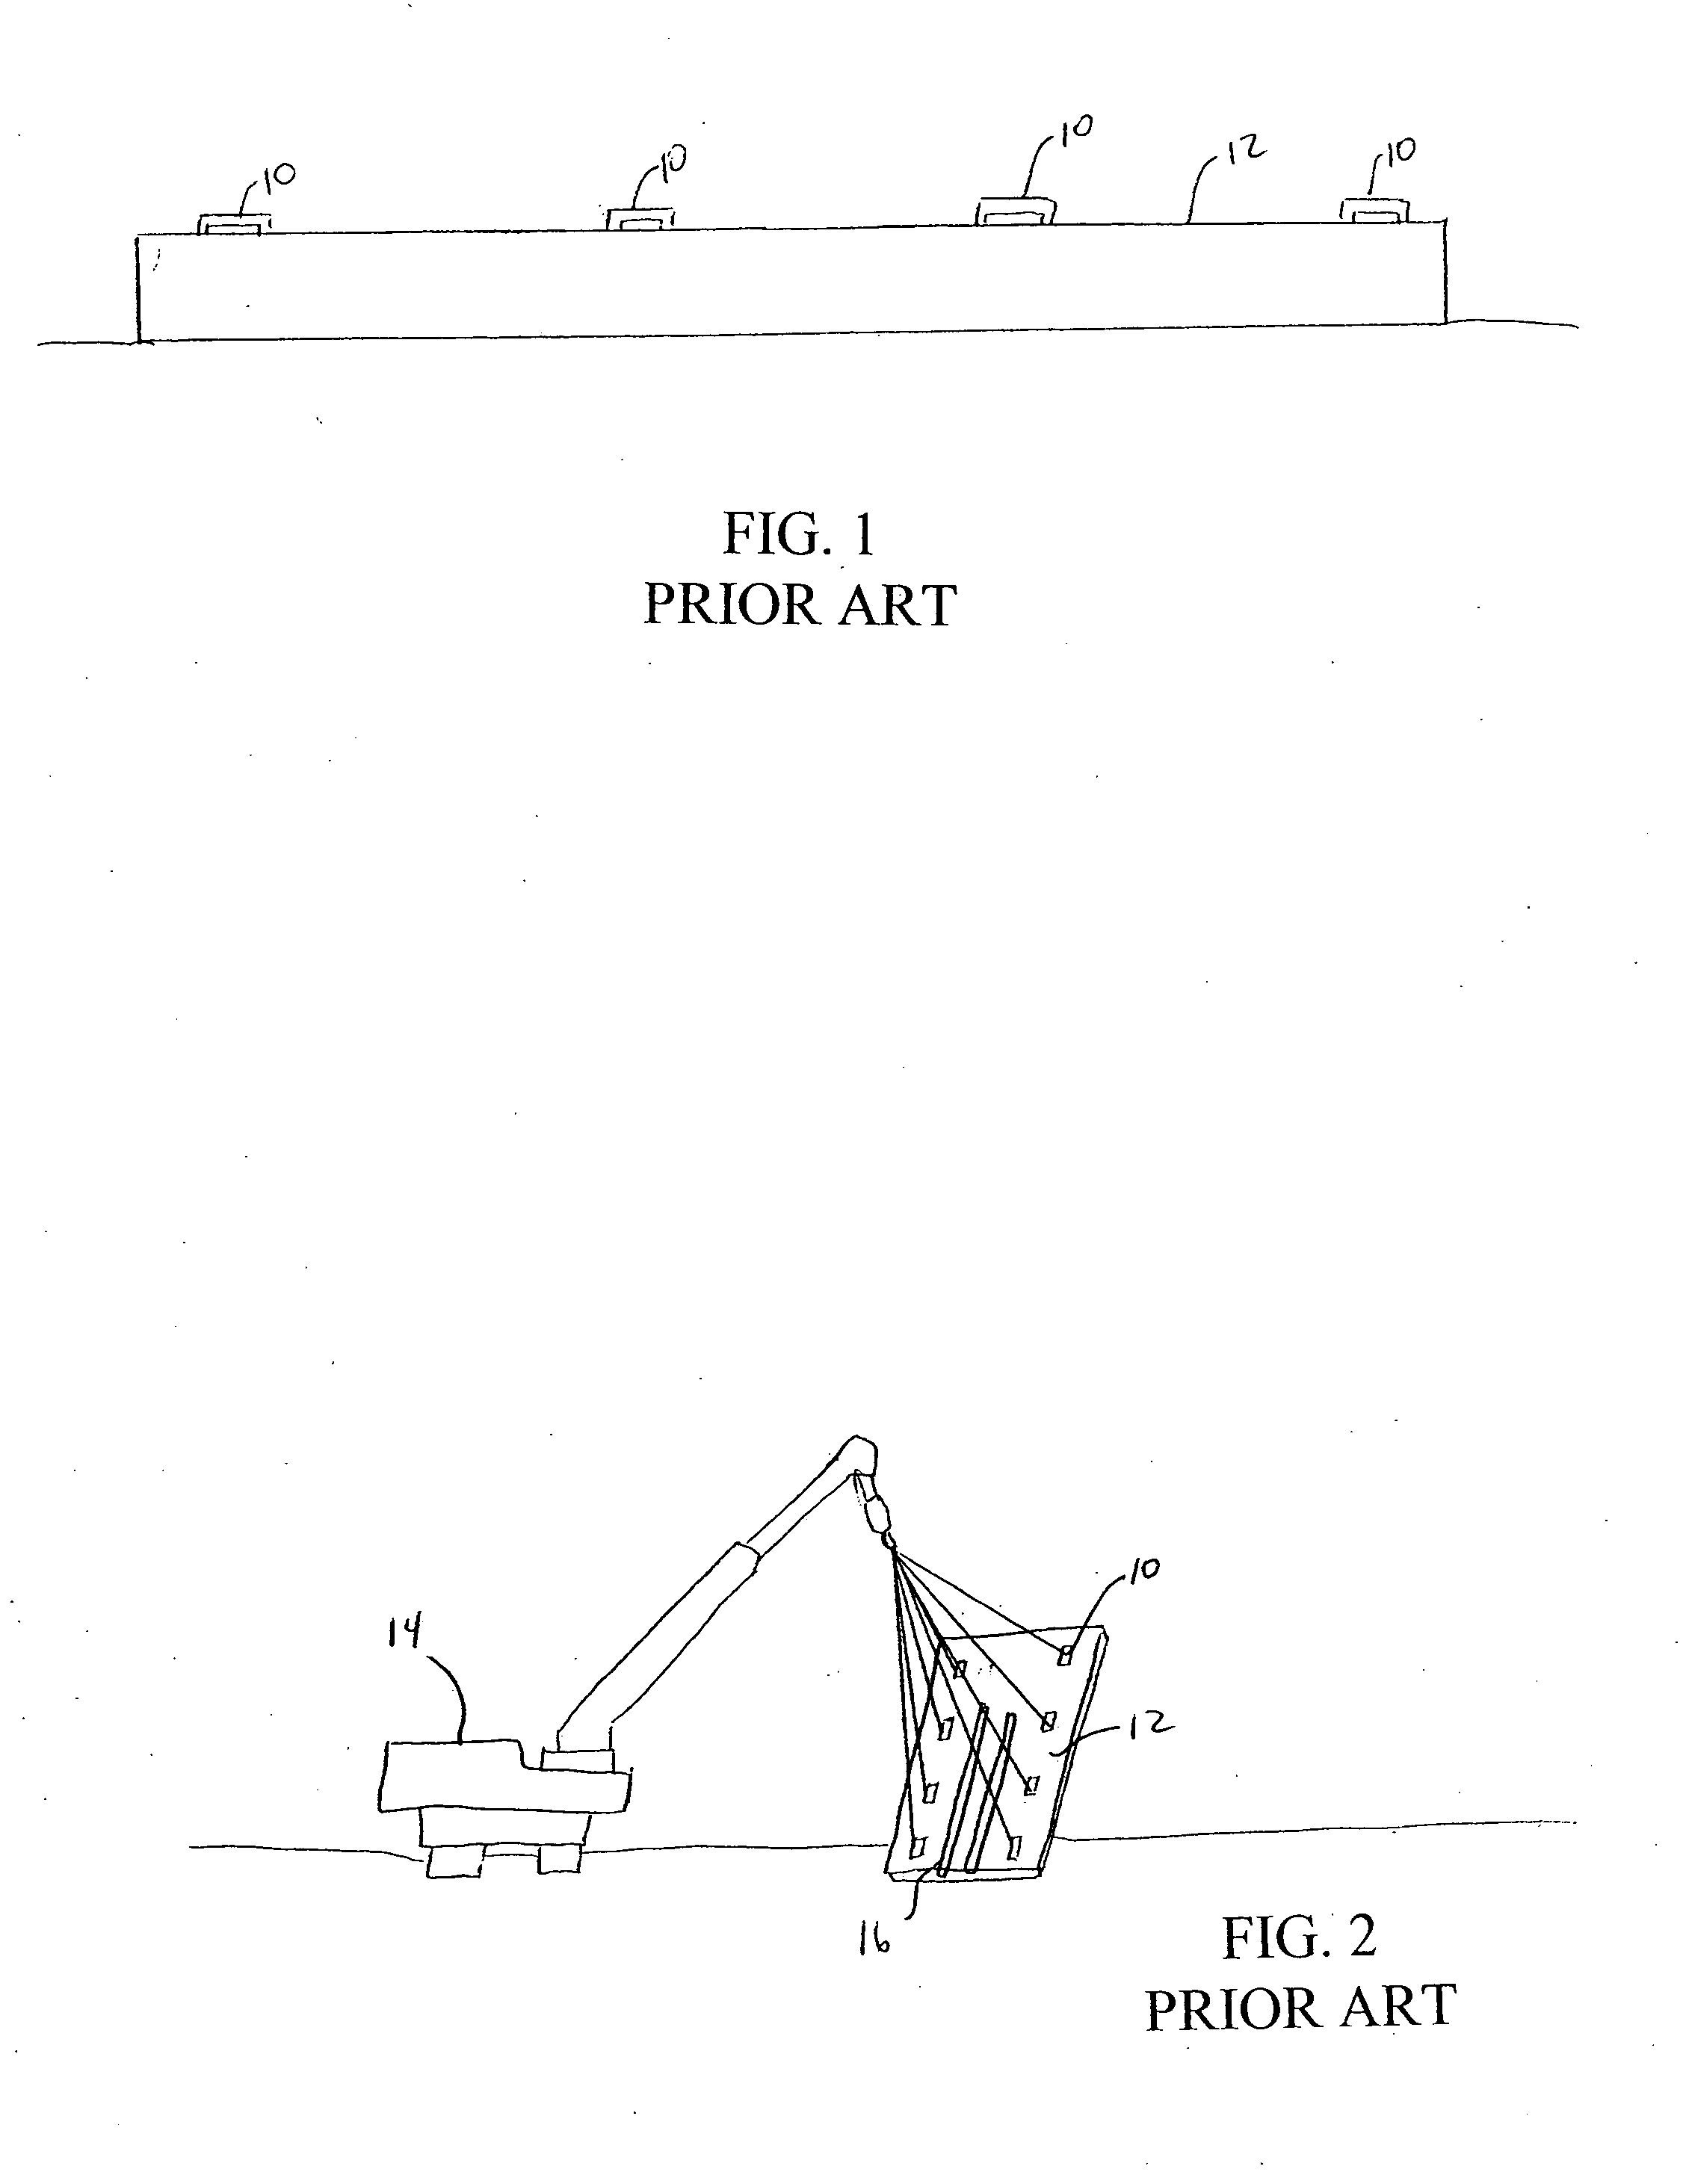 Method of forming a decorative concrete wall